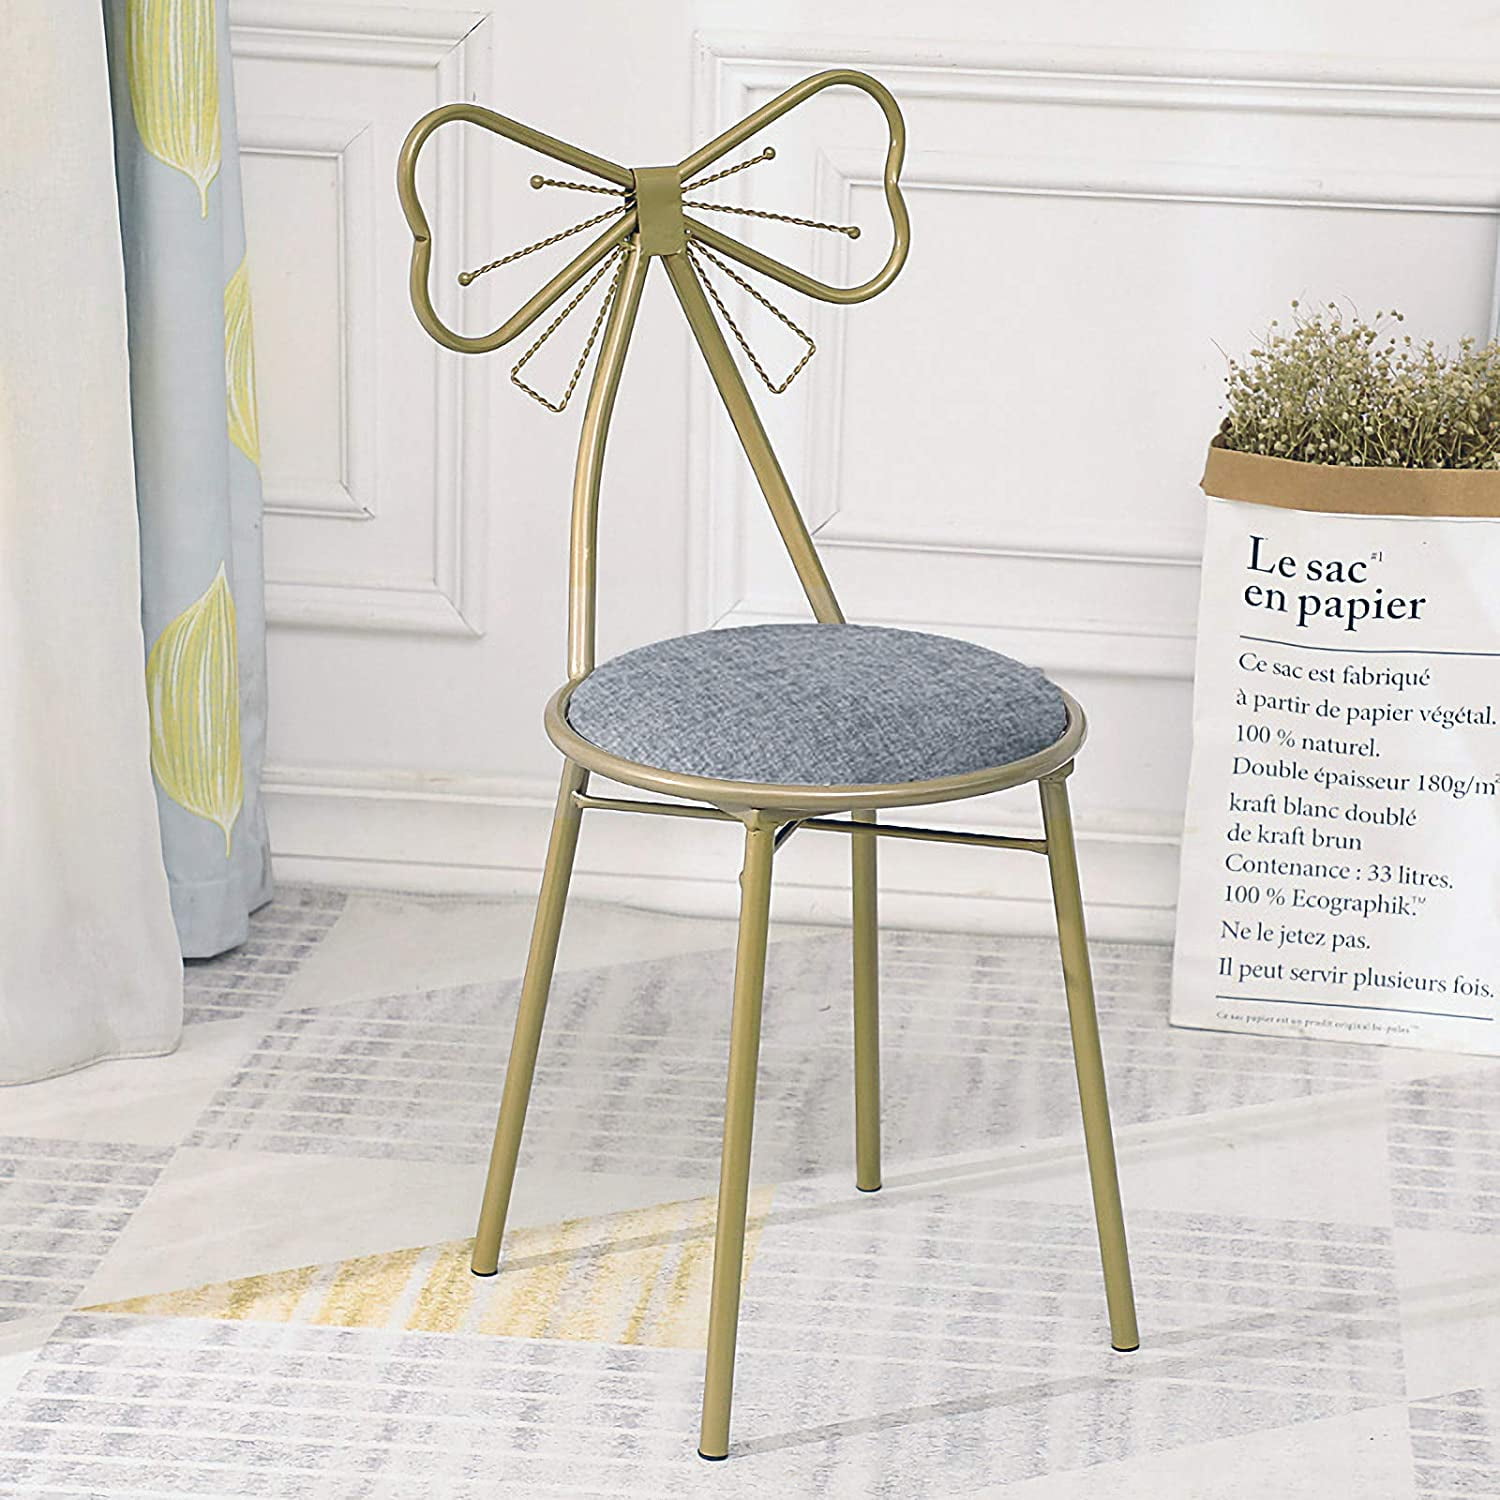 Salonmore Bow Shaped Vanity Chair Iron, How To Make A Vanity Stool